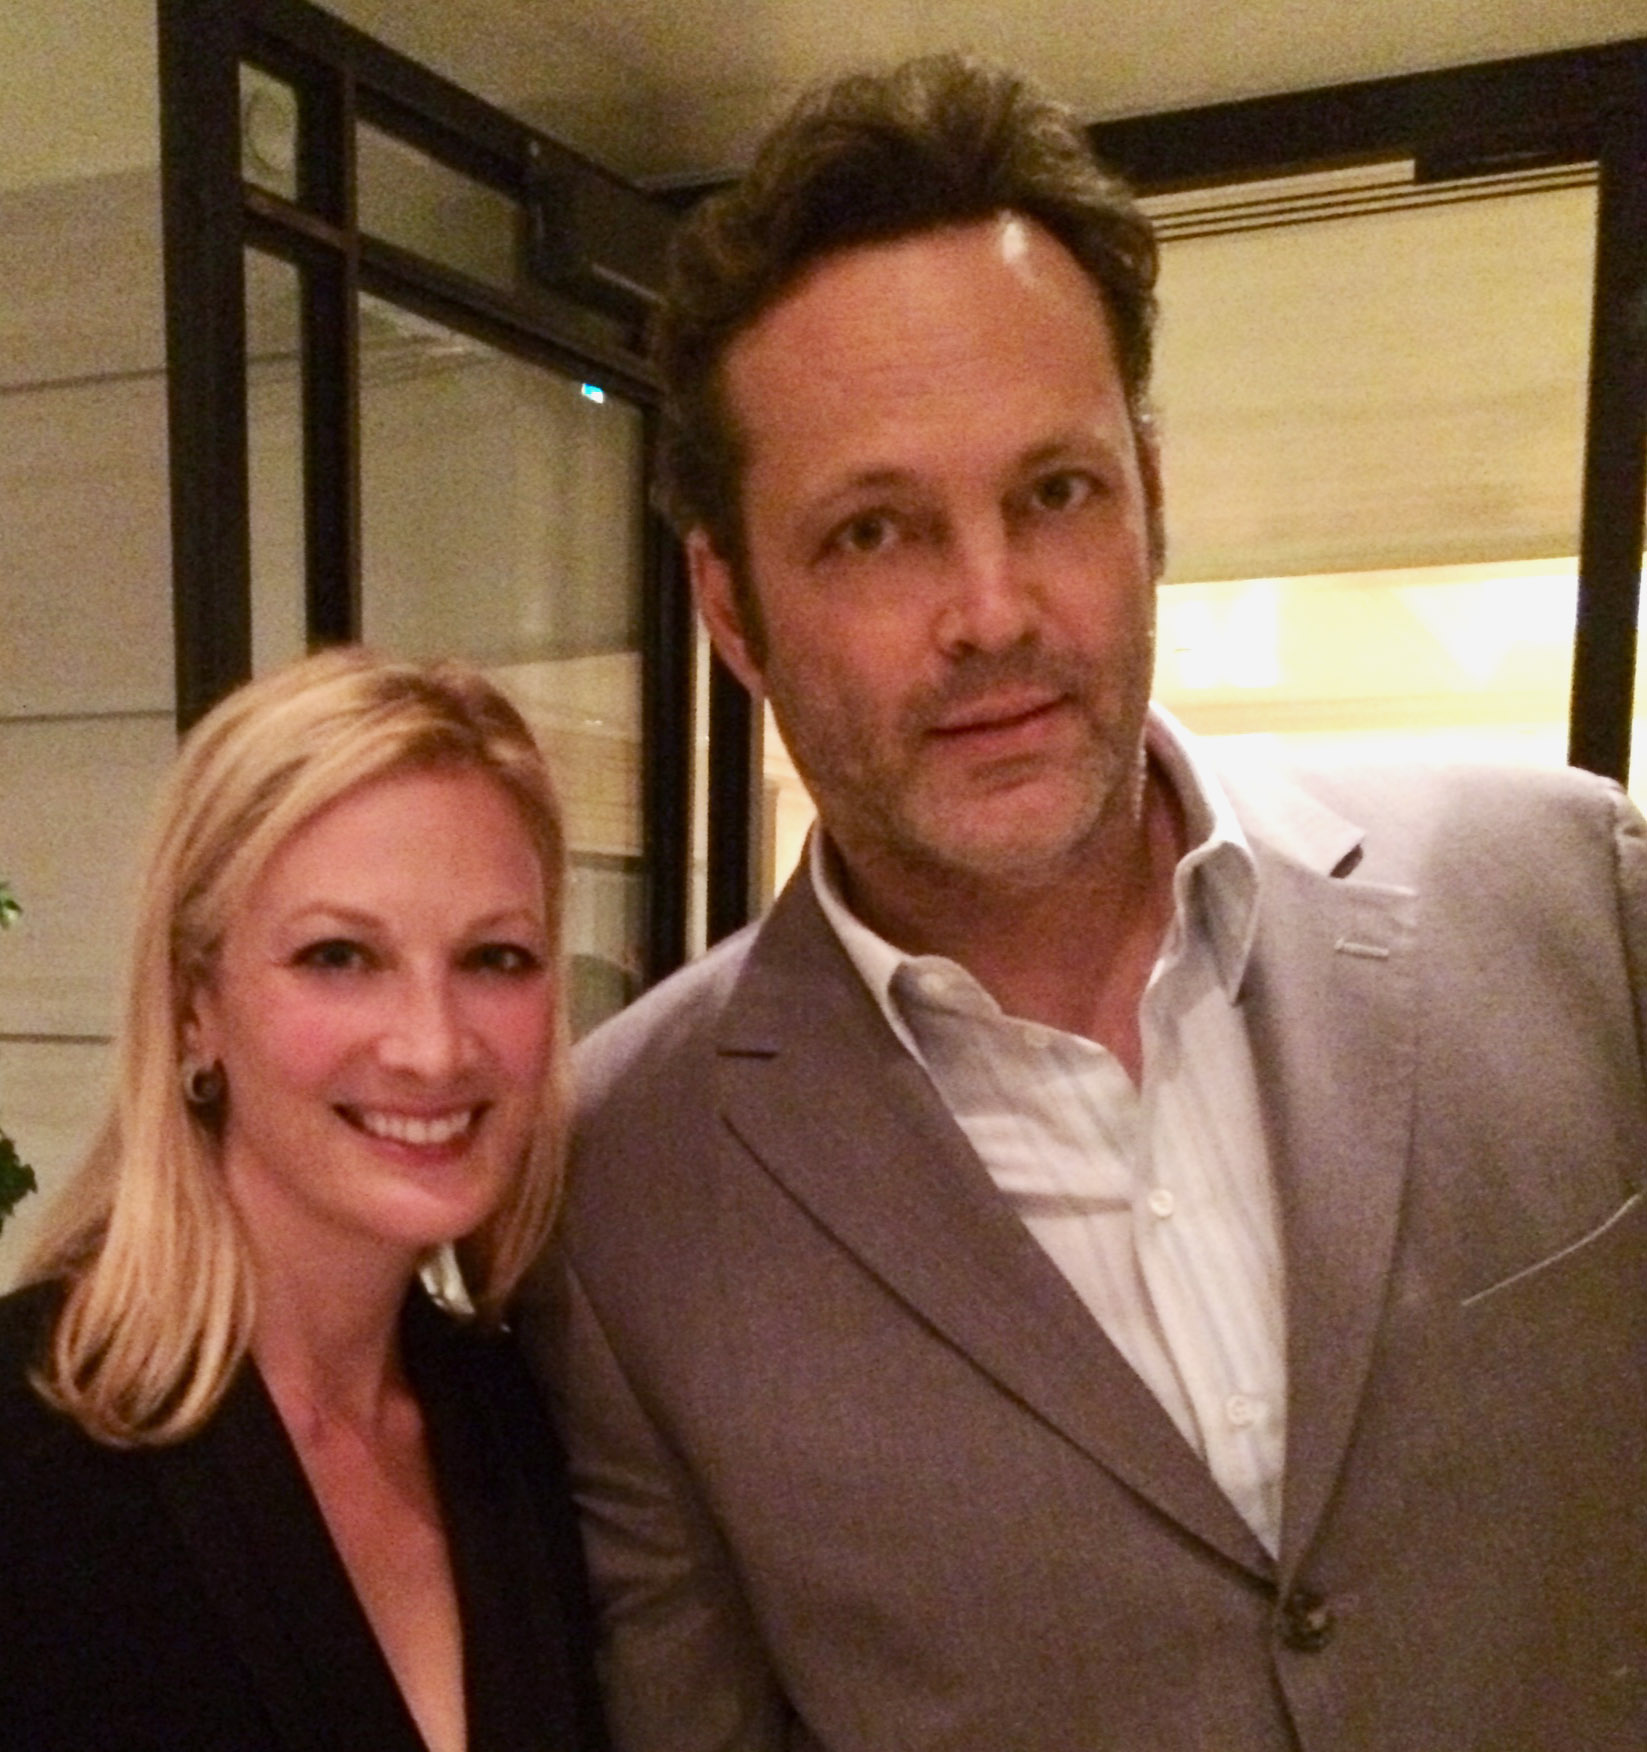 Jamee Natella and Vince Vaughn at the Healthy Child Healthy World Event. London Hotel, October 2014.